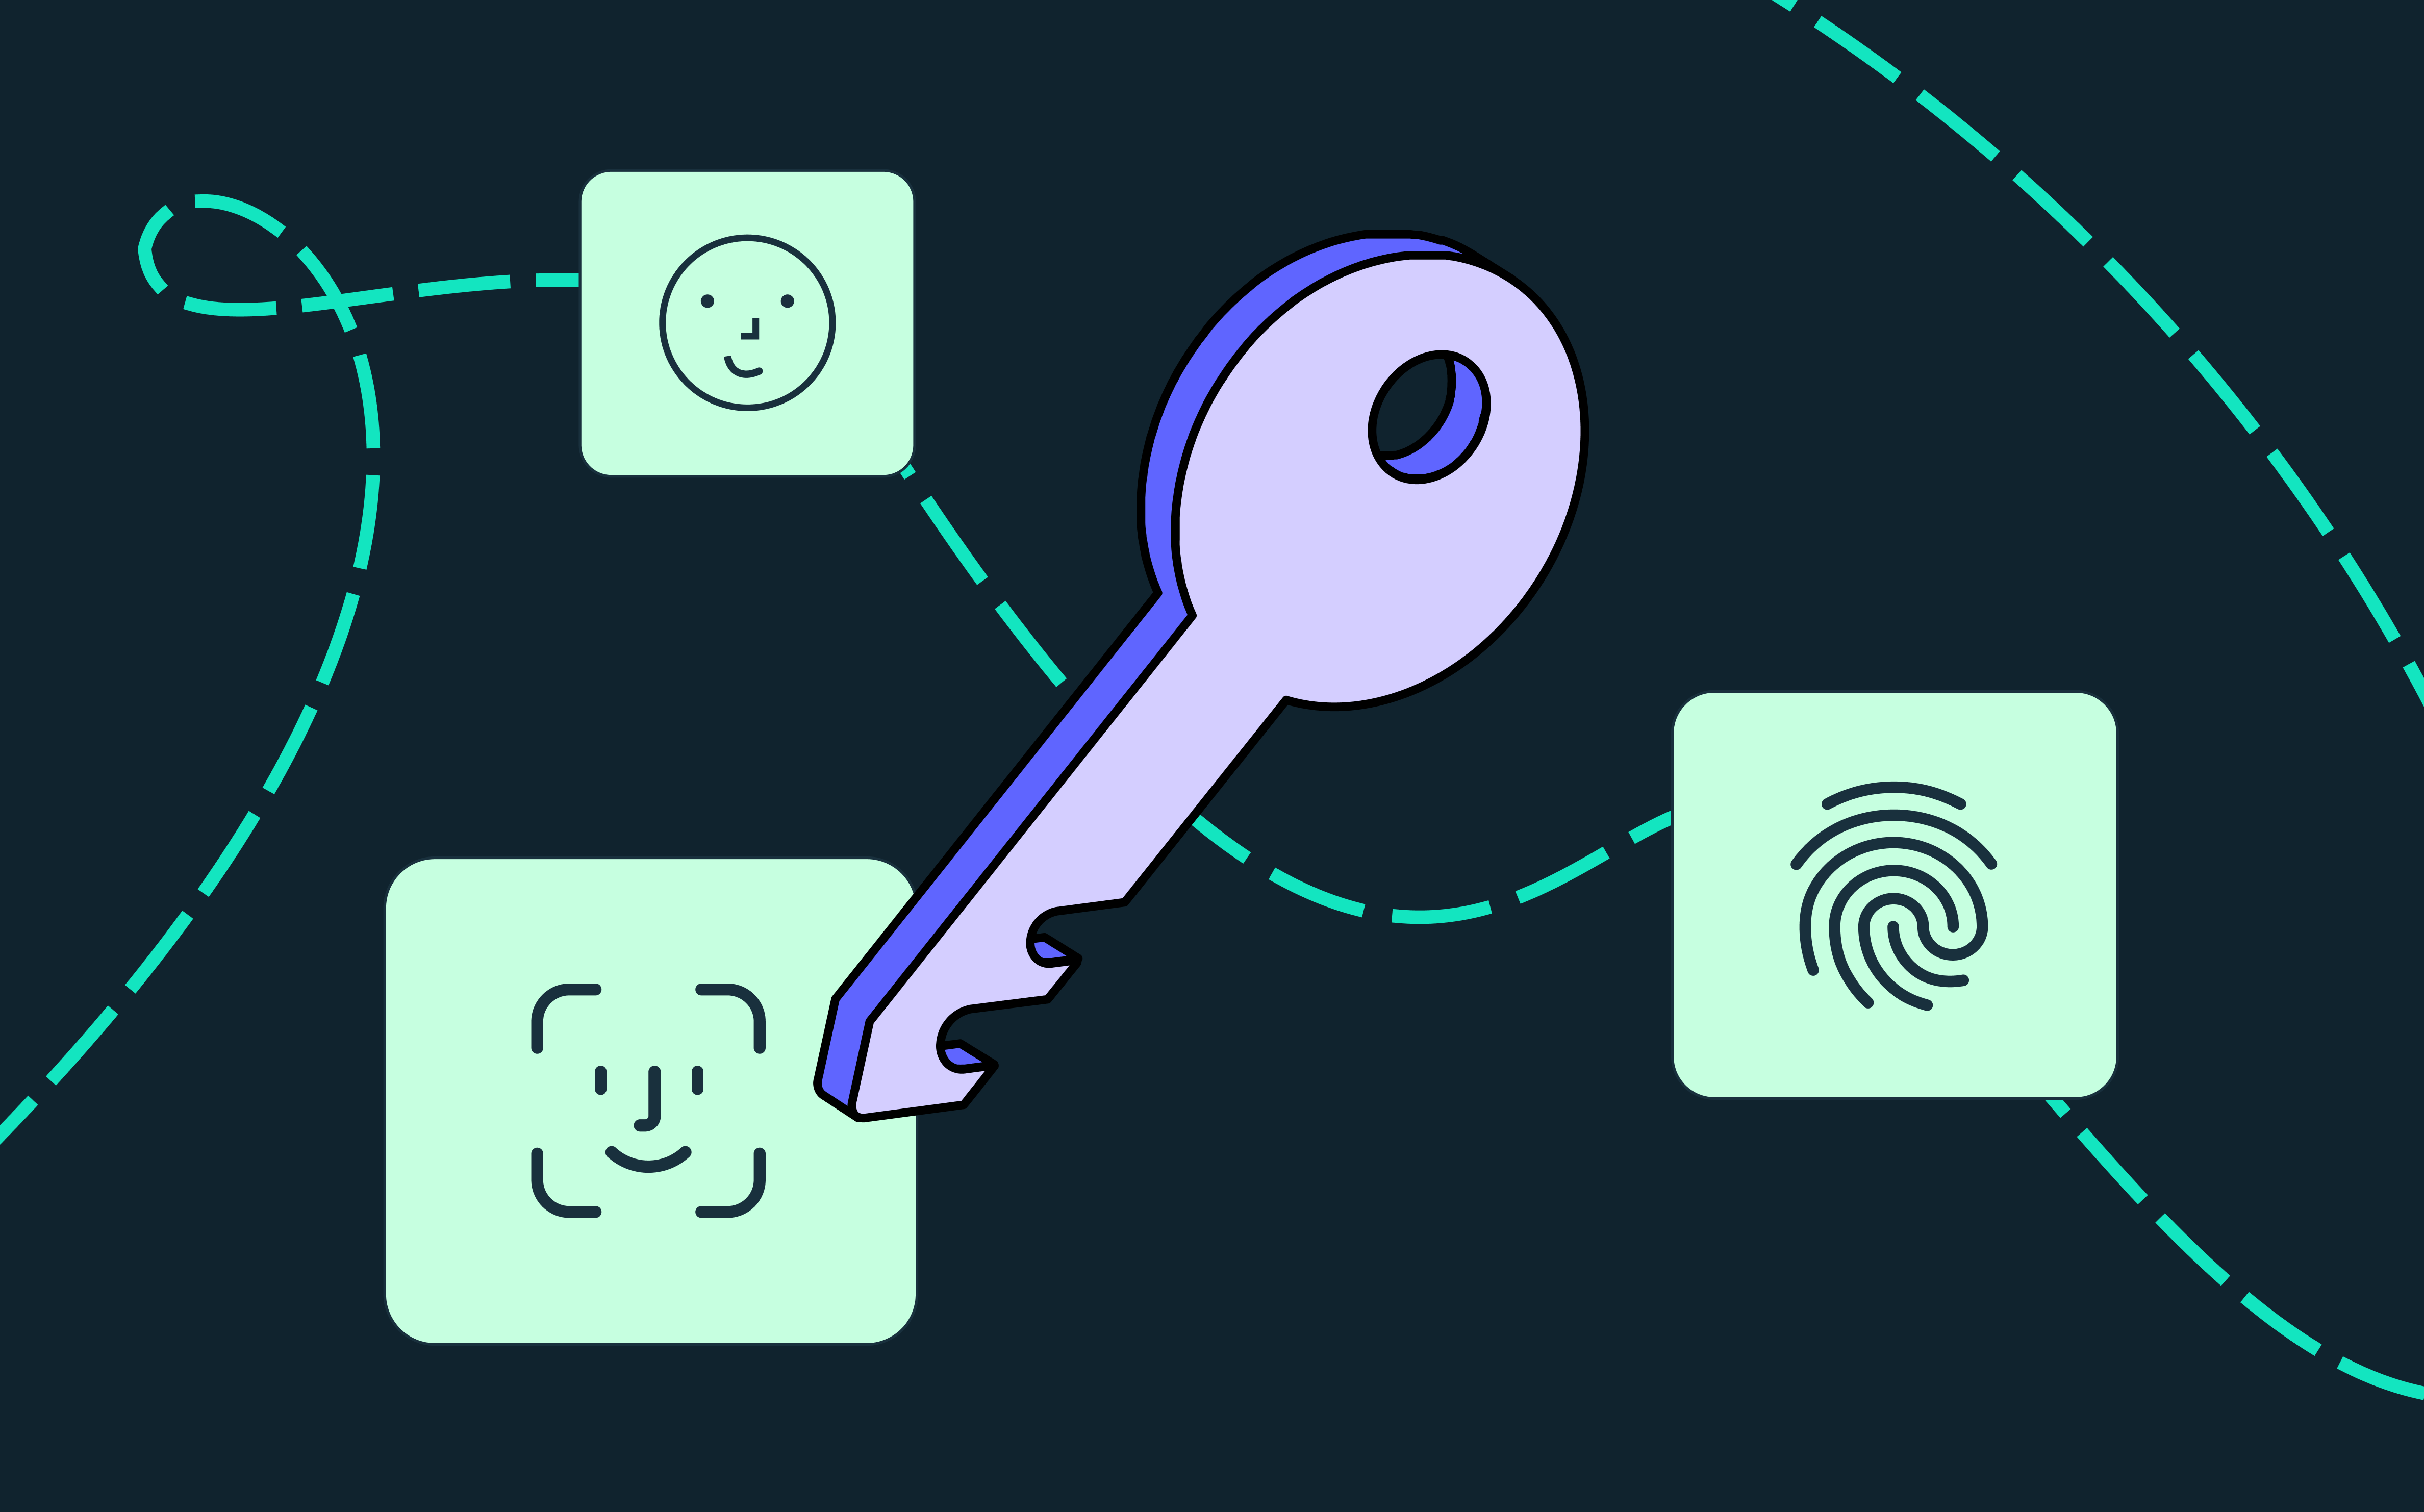 An abstraction of a passkey, with an illutration of a key surrounded by floating icons representing different forms of biometric authentication